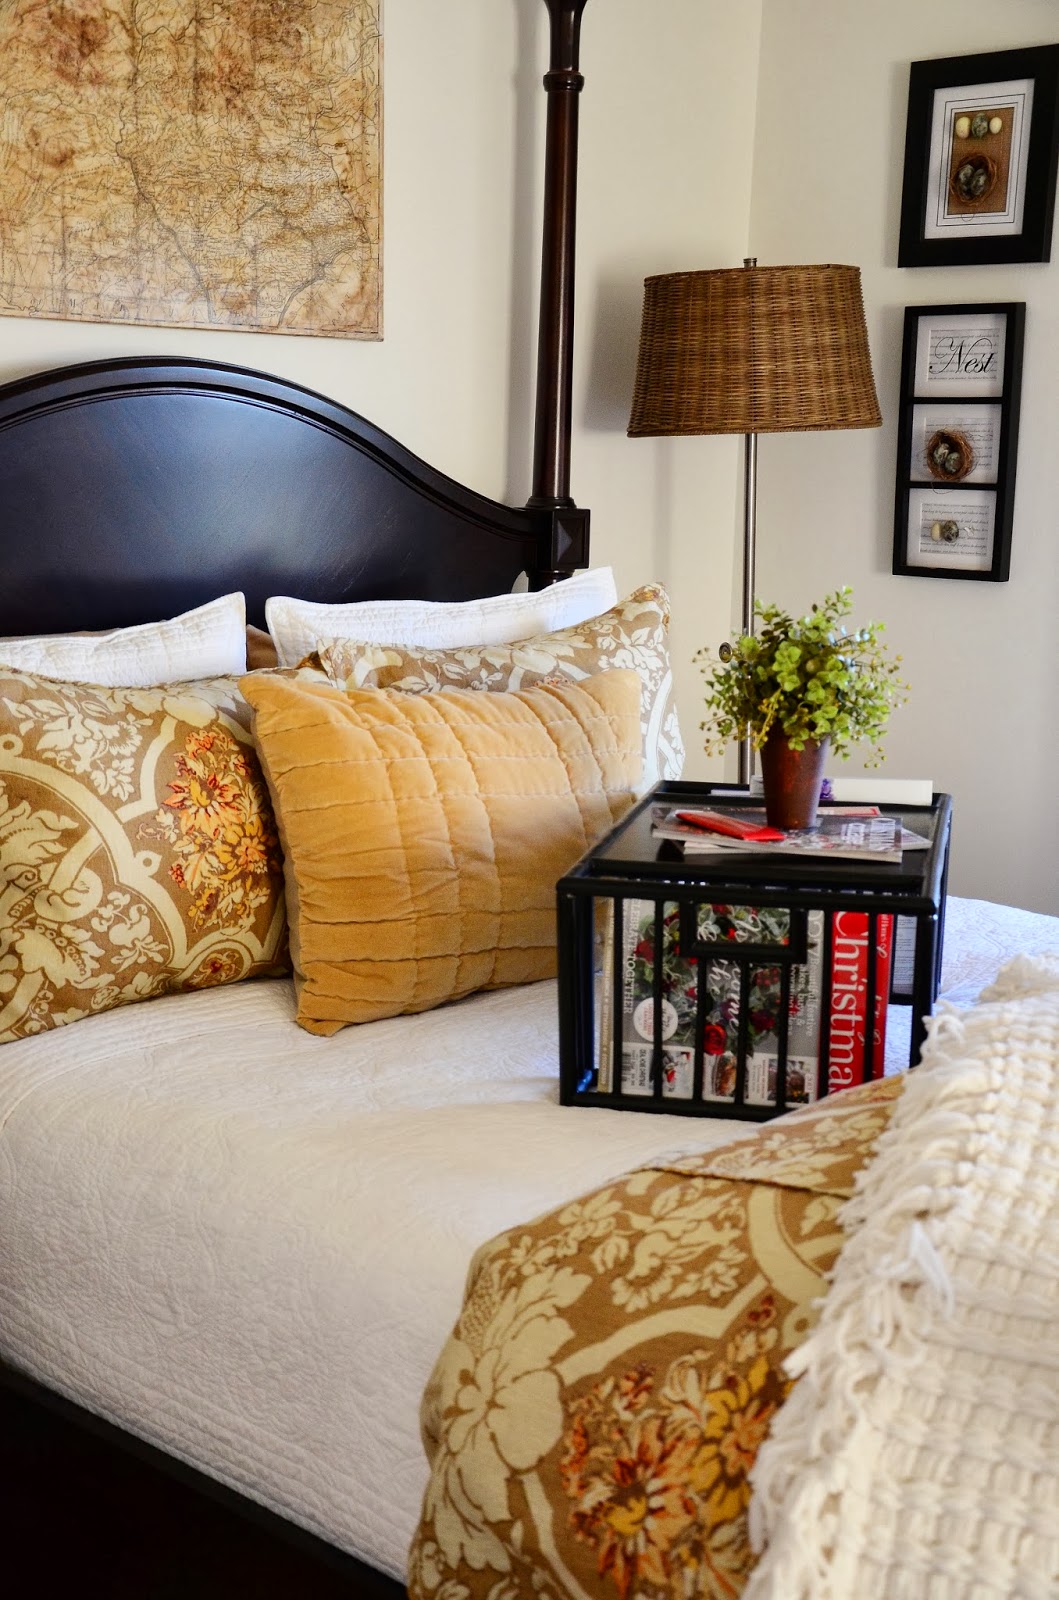 THE MAKING OF A COZY GUEST BED - Interior Design Ideas for Your Modern Home